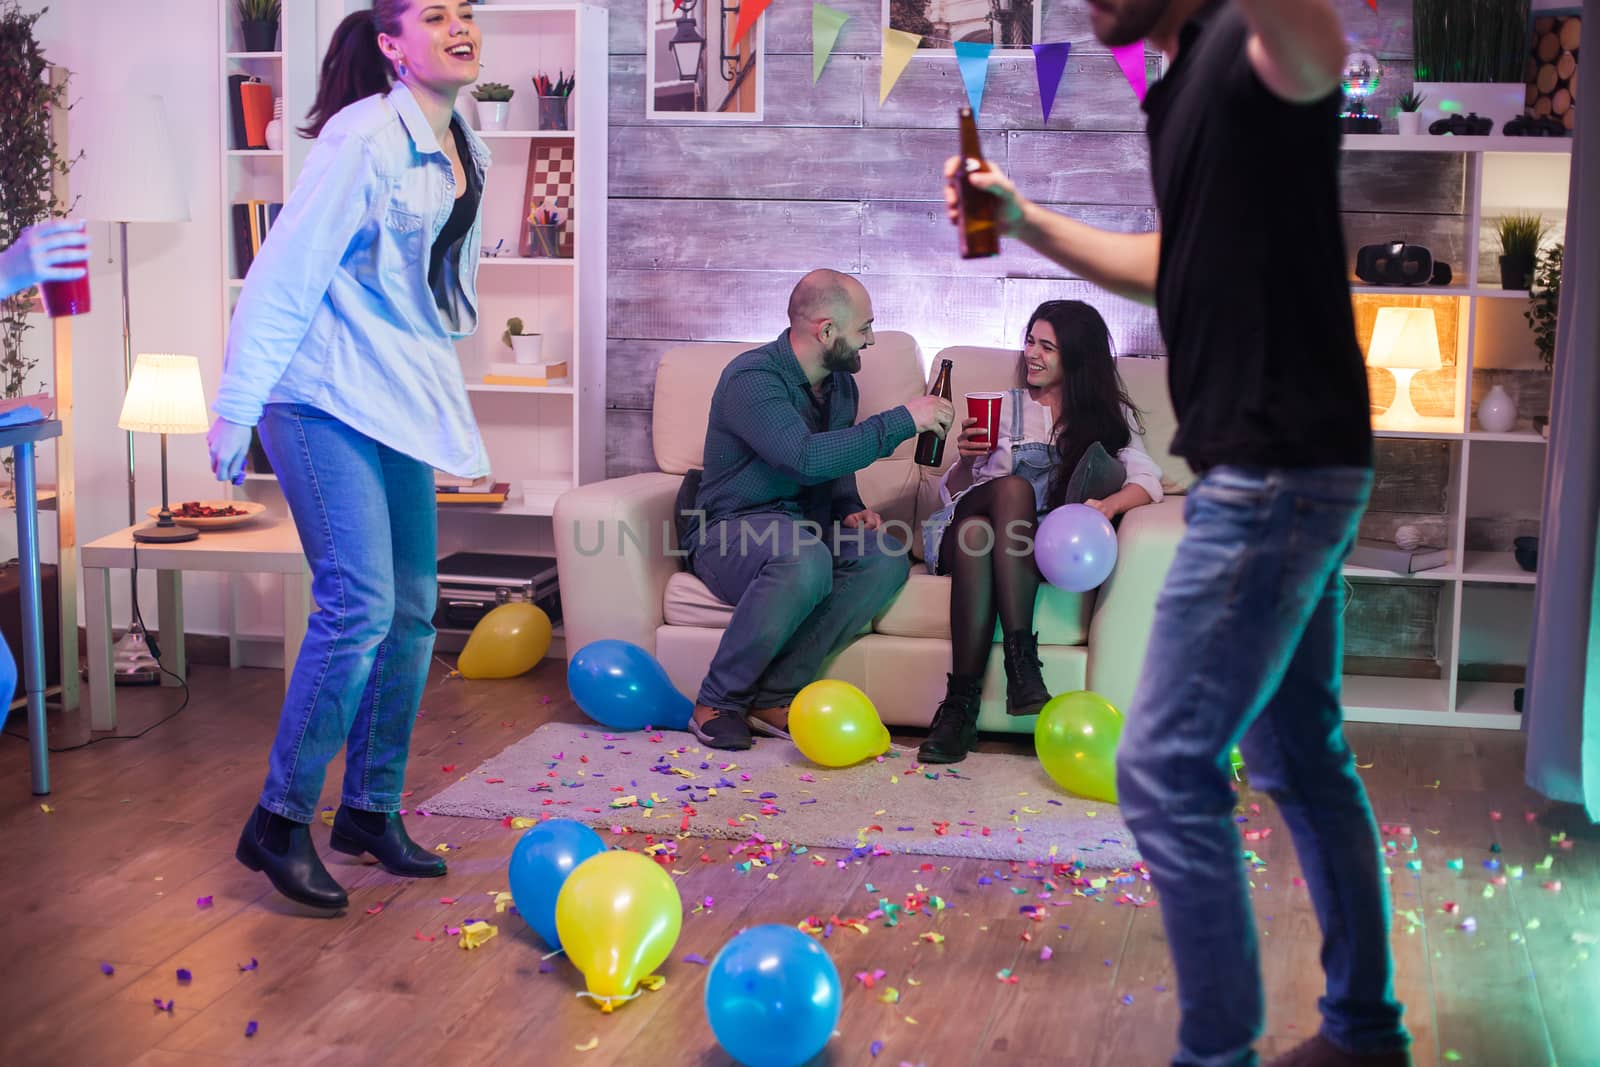 Beautiful young couple full of happiness at a party drinking alcohol.